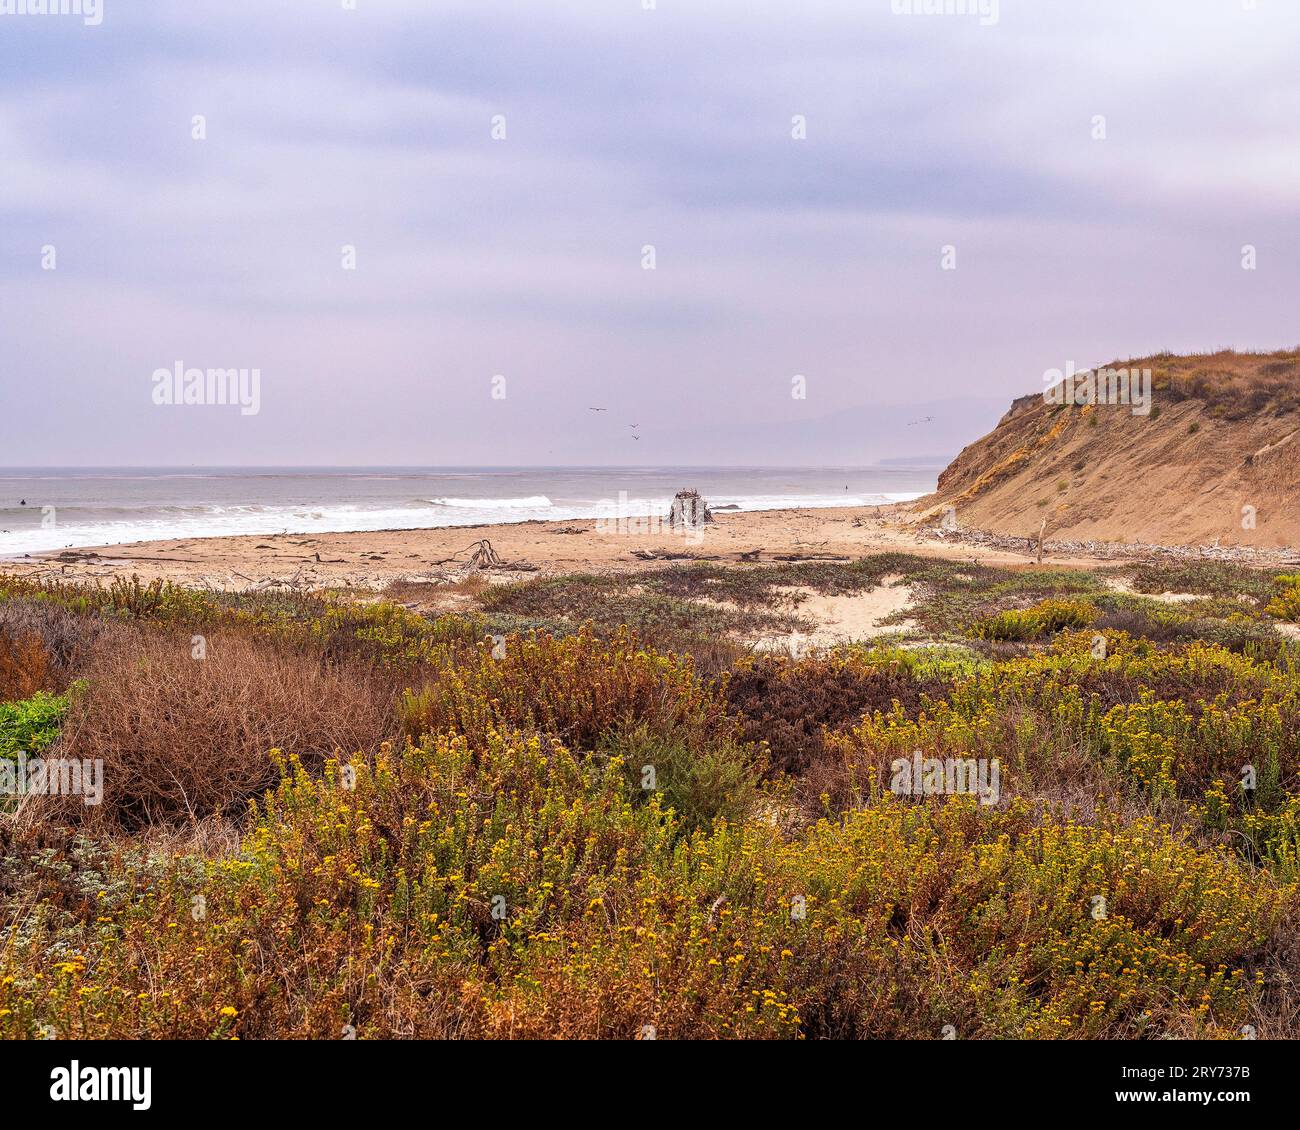 Pacific ocean view at Jalama Beach in Lompoc, CA. Stock Photo